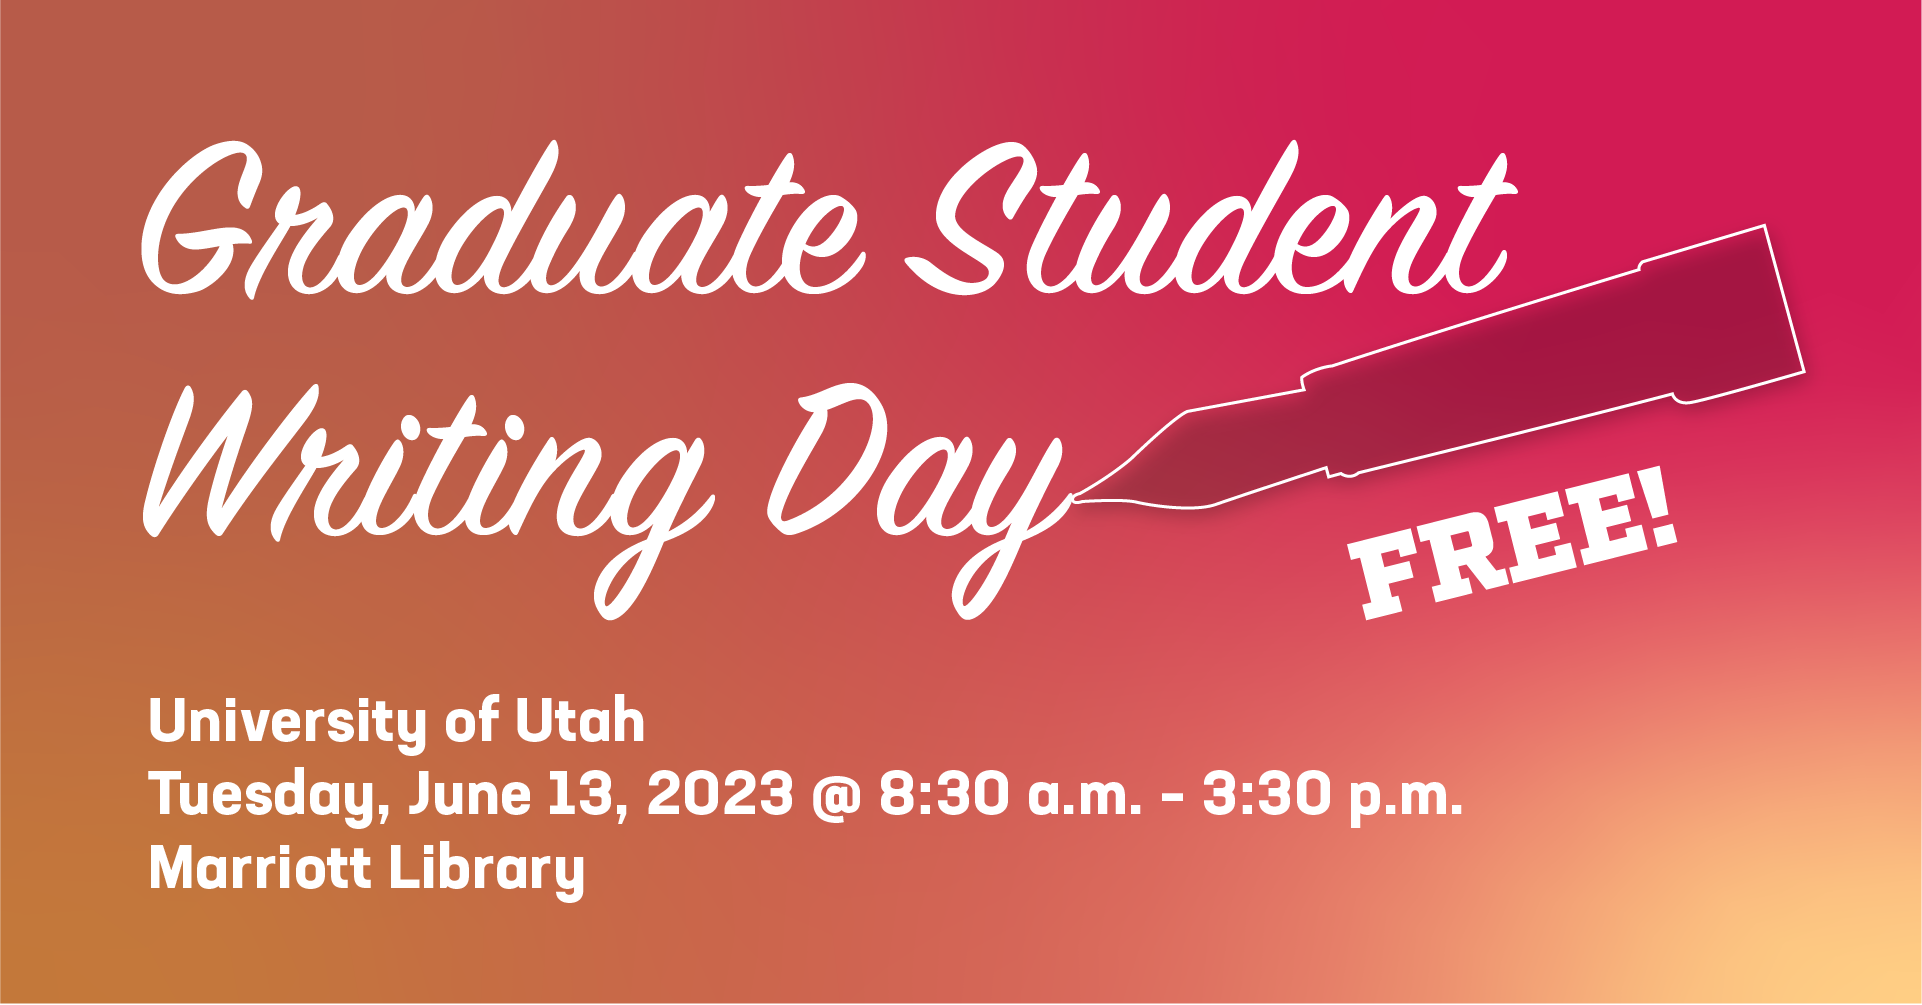 2023 Summer Graduate Student Writing Day on June 13th from 8:30 AM to 3:30 PM at the Marriott Library